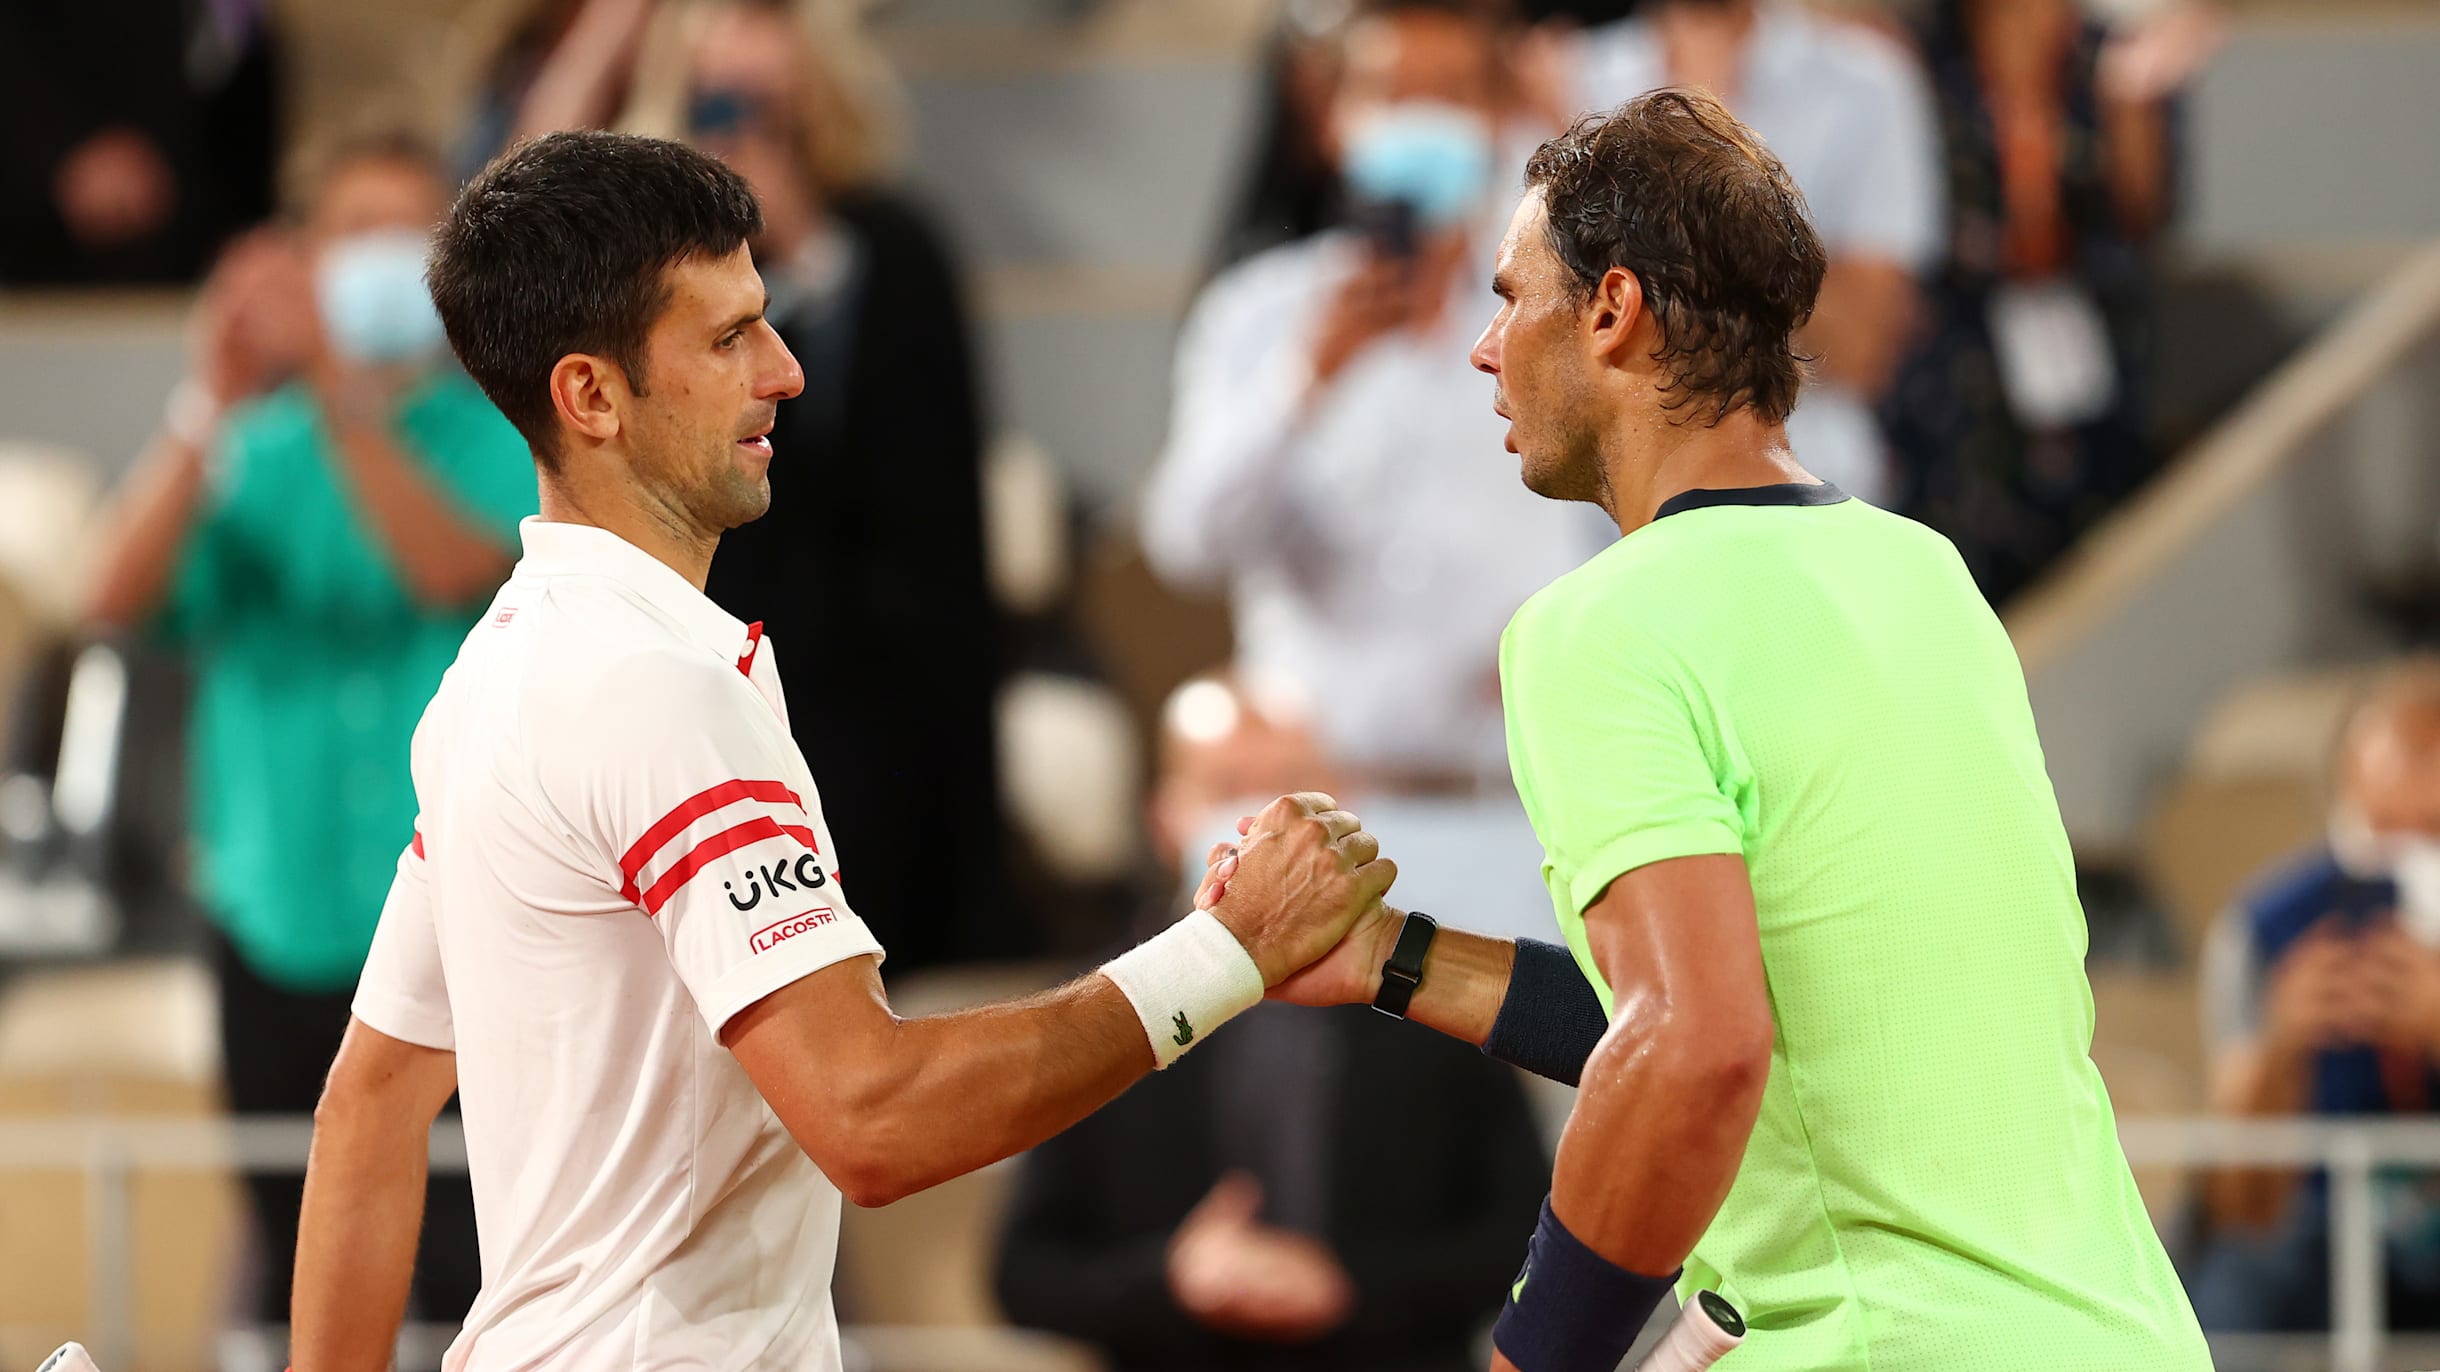 Rafael Nadal vs Novak Djokovic, French Open 2022 quarter-finals, watch live streaming and telecast in India